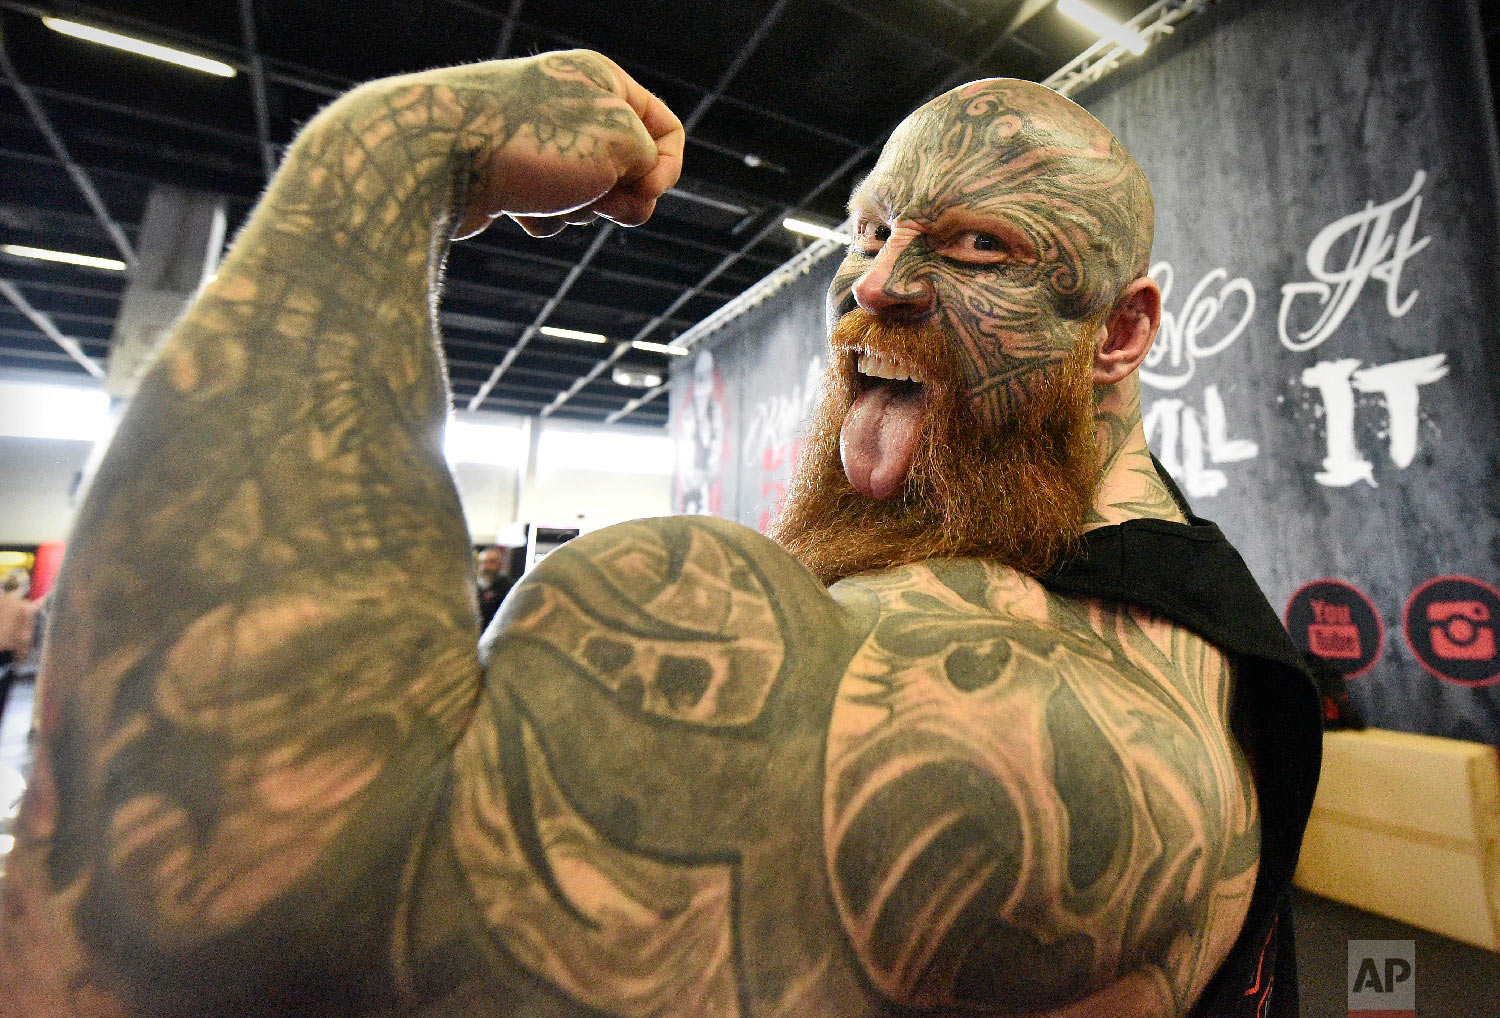  Bodybuilder Jens shows his muscles at the world's largest fitness trade show FIBO in Cologne, Germany on April 12, 2018. (AP Photo/Martin Meissner) 